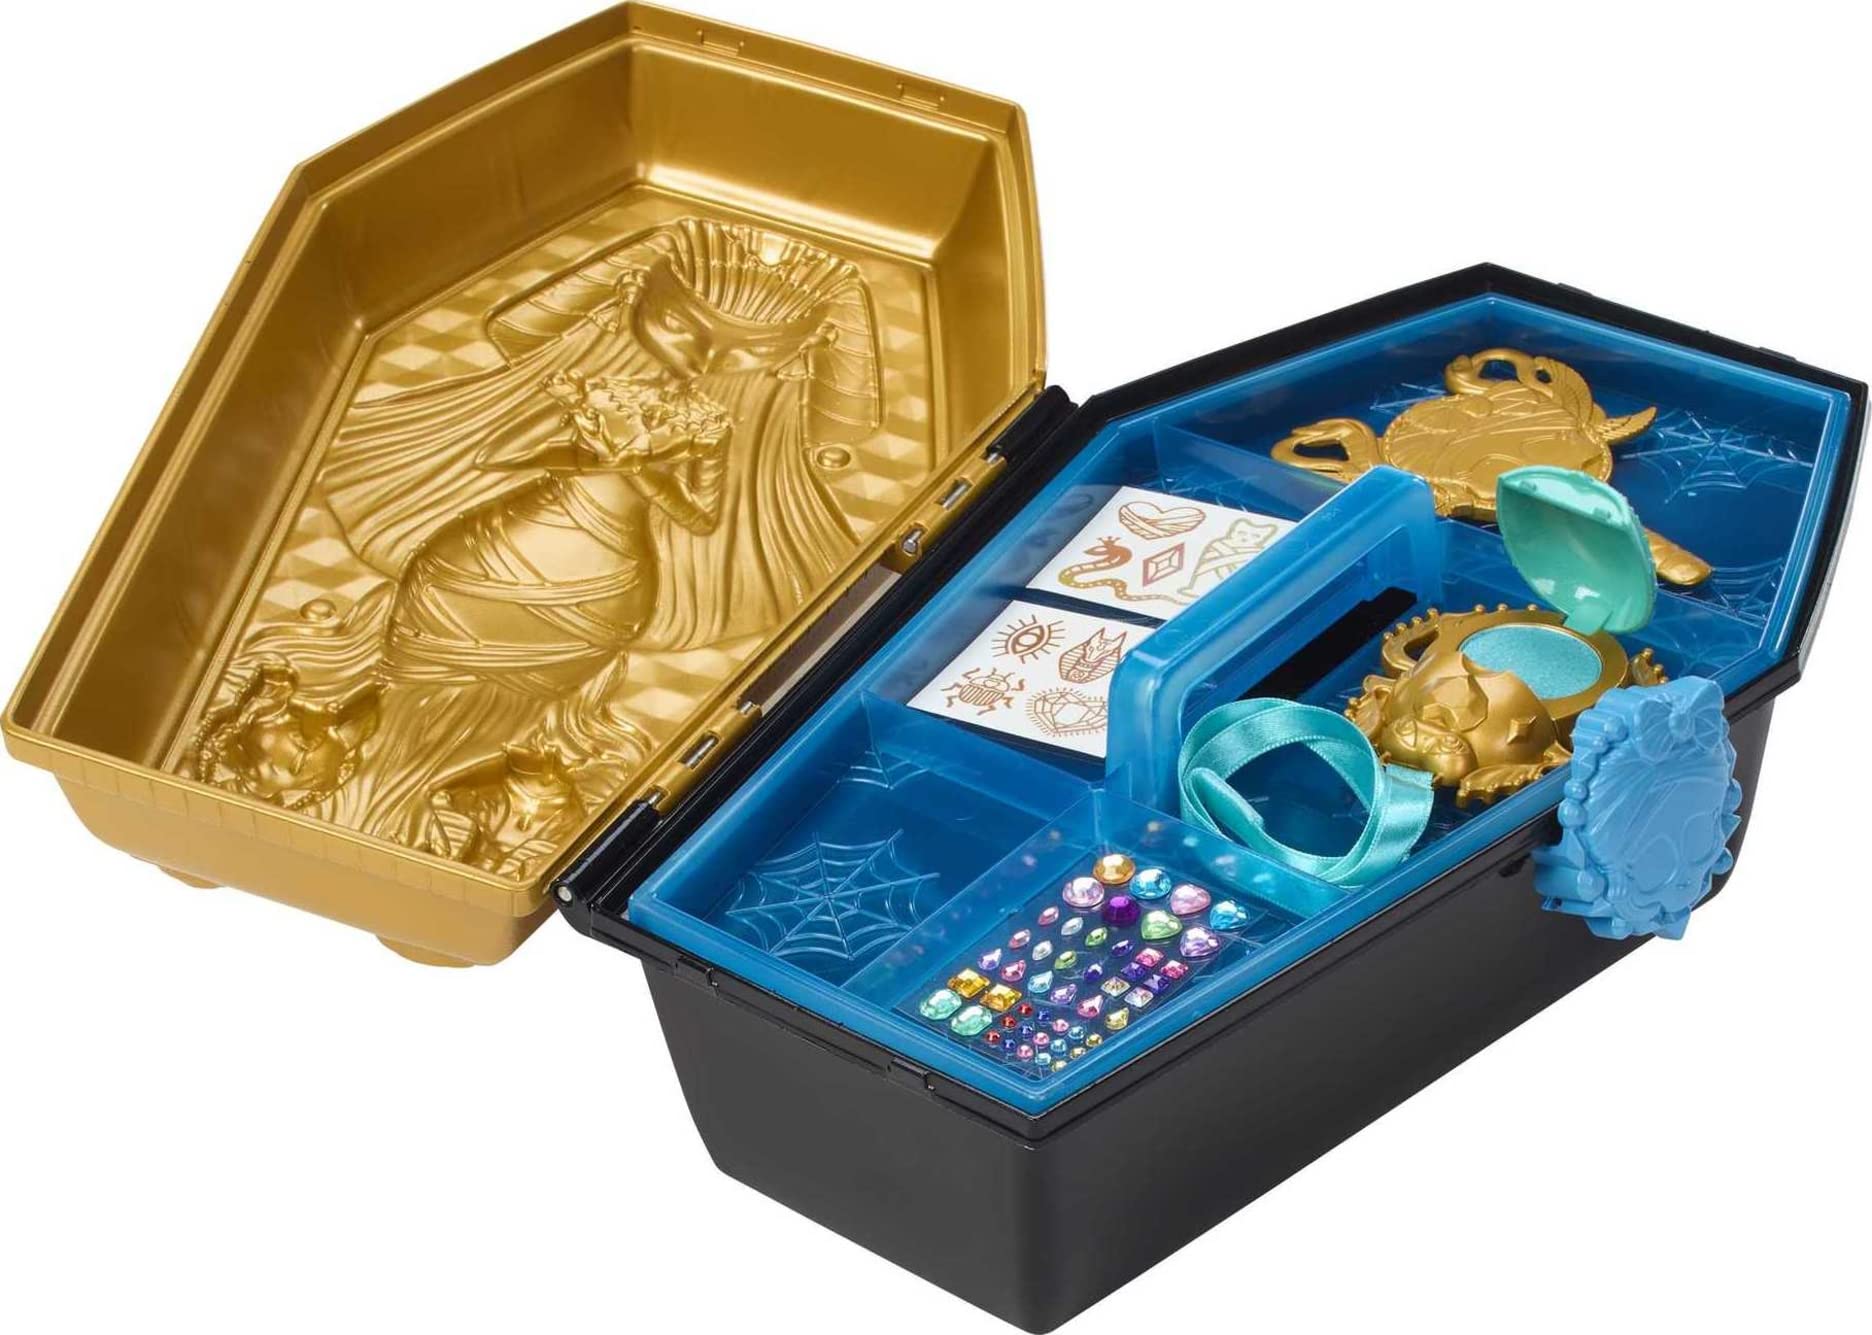 Monster High Doll and Beauty Kit, Cleo De Nile Golden Glam Case with Tattoos and Necklace for Kids (Amazon Exclusive)